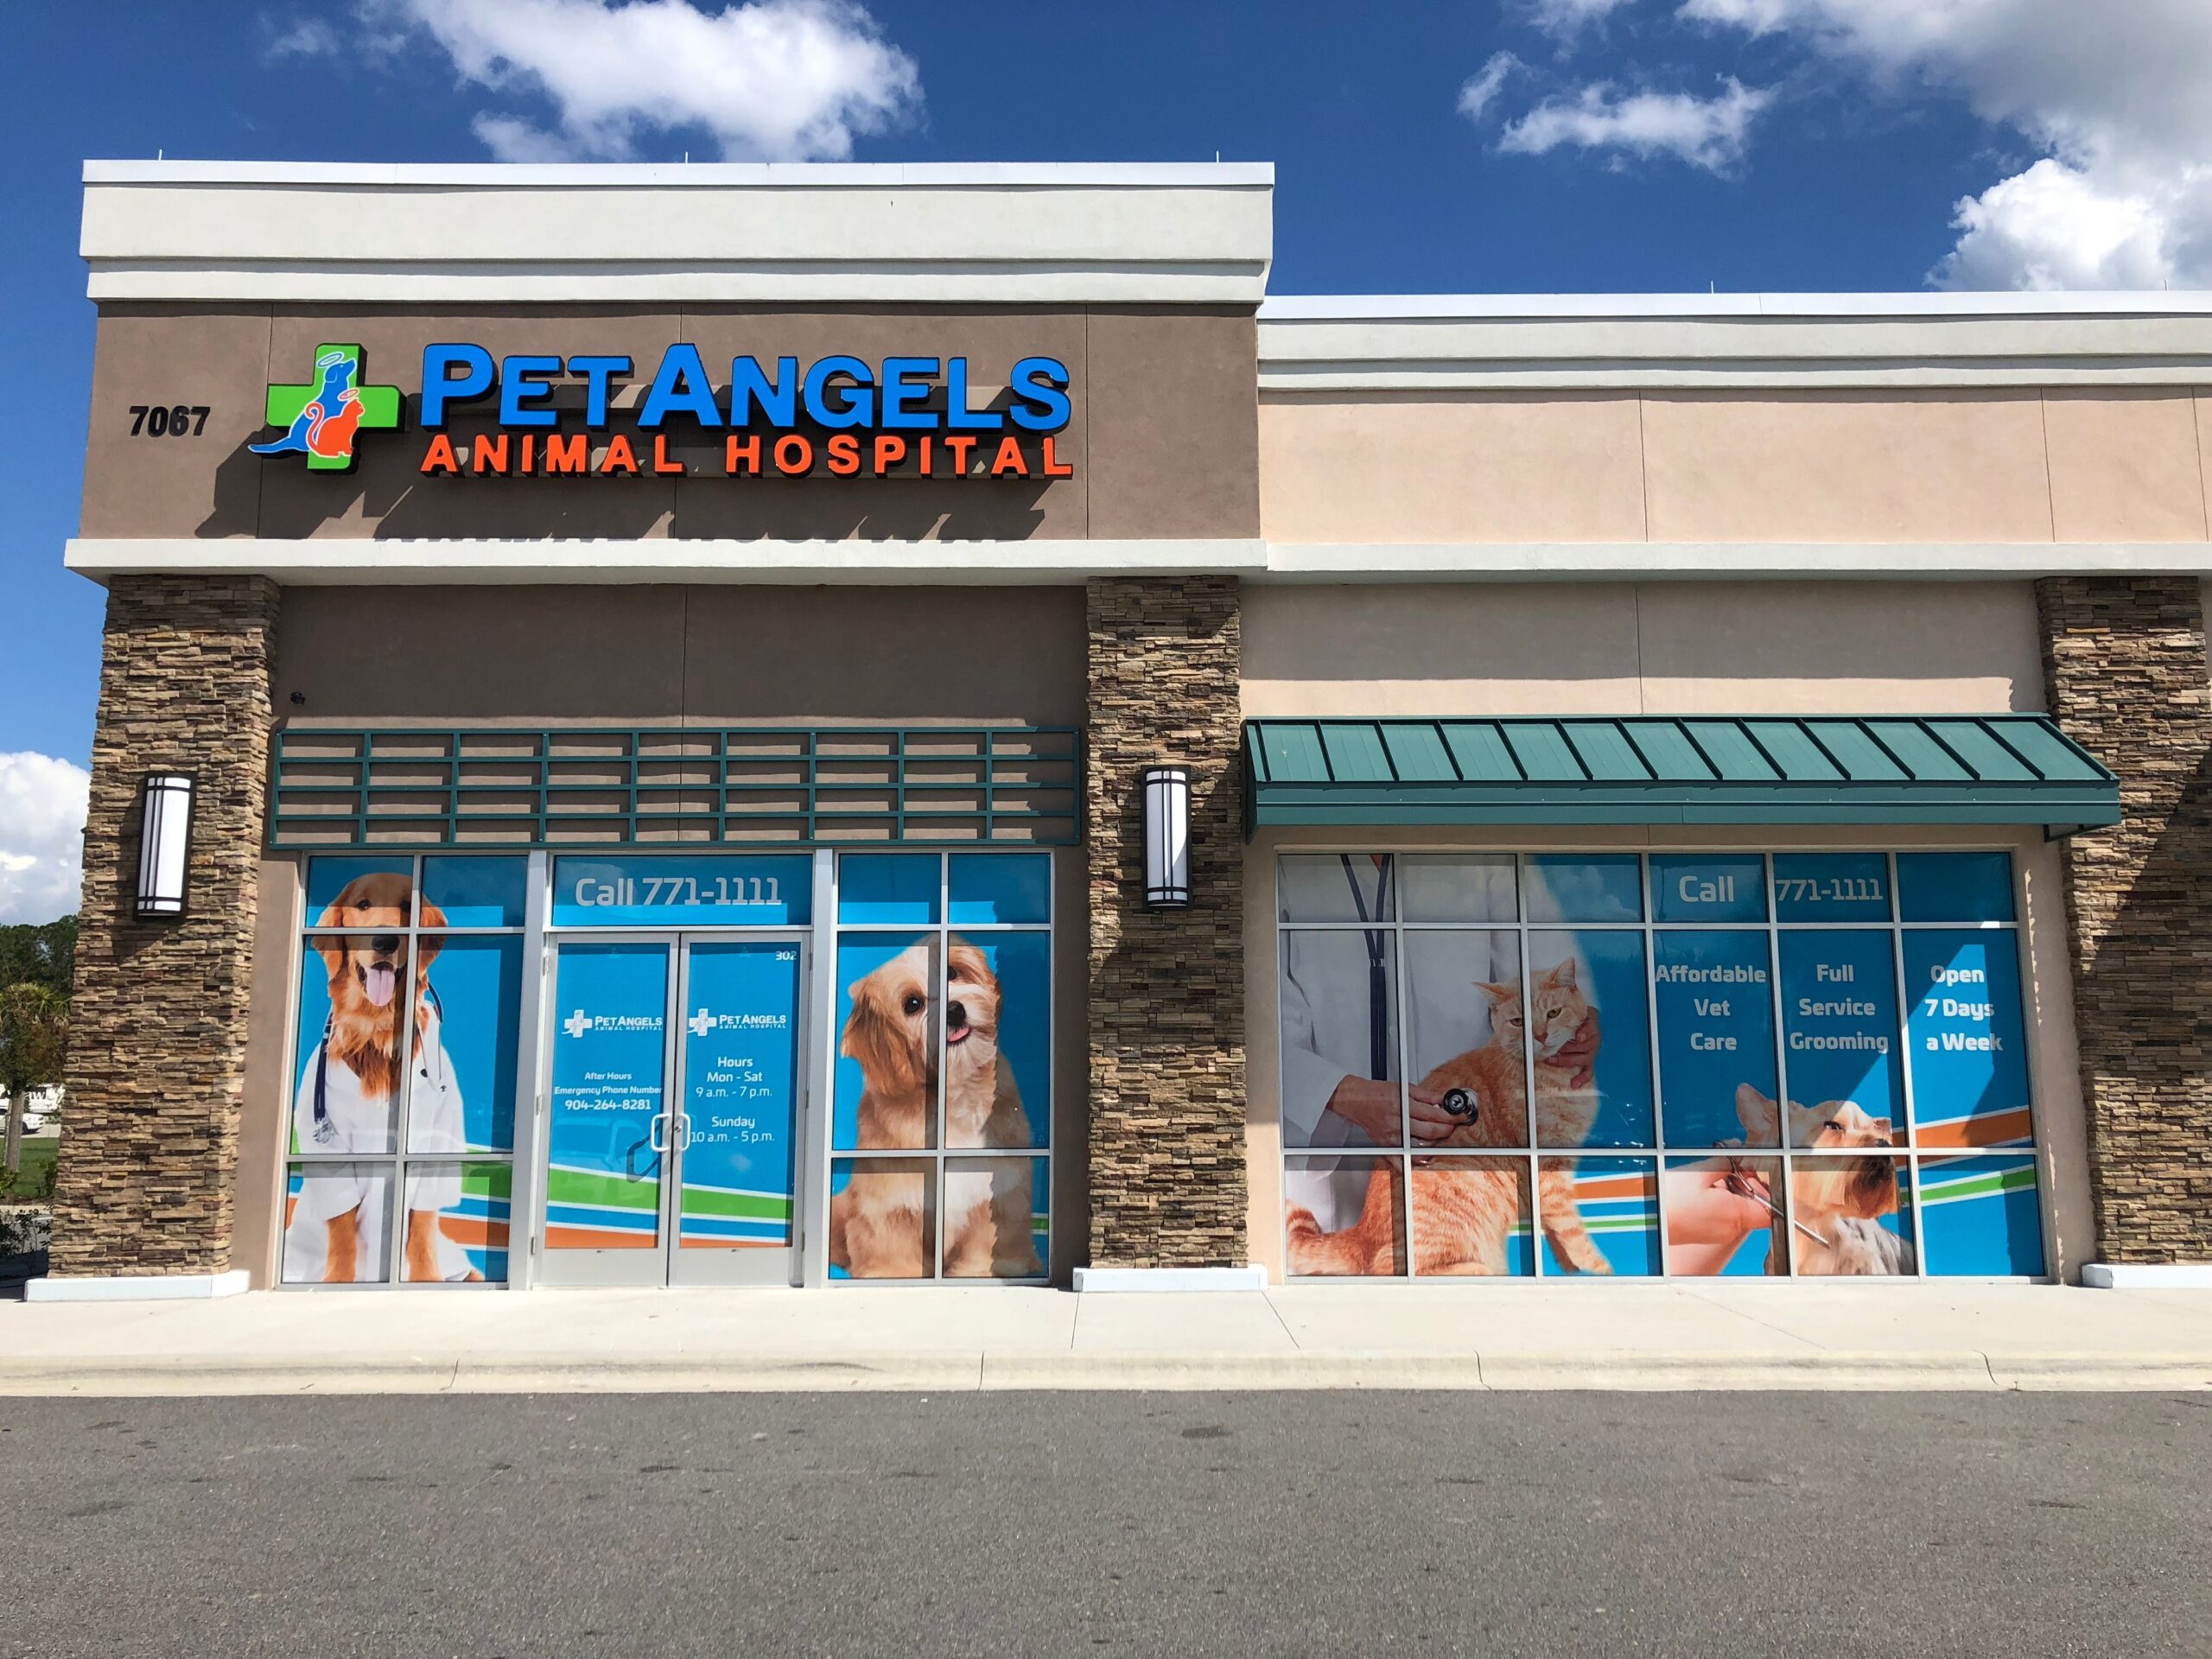 A custom exterior vinyl window wall wrap depicted on the front windows of a pet shop and animal hospital building.